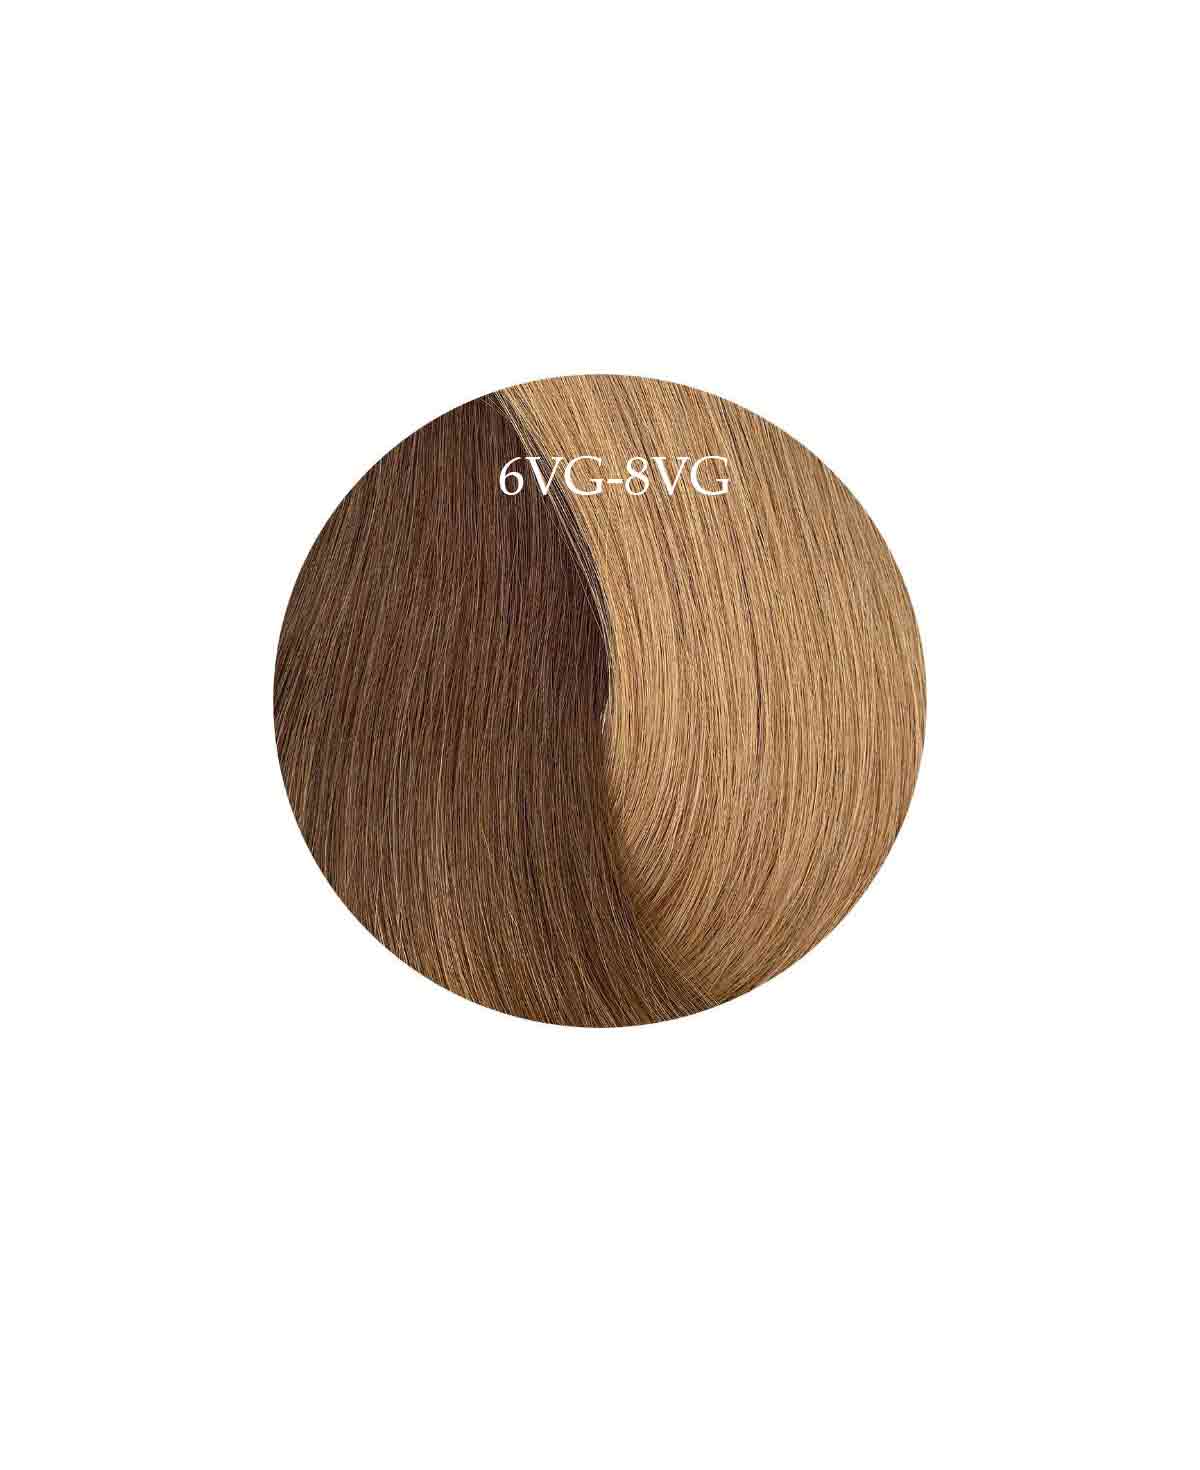 30-35cm (14") SKIN WEFT HAIR-EXTENSIONS - OMBRE COOL BROWN - 6VG-8VG